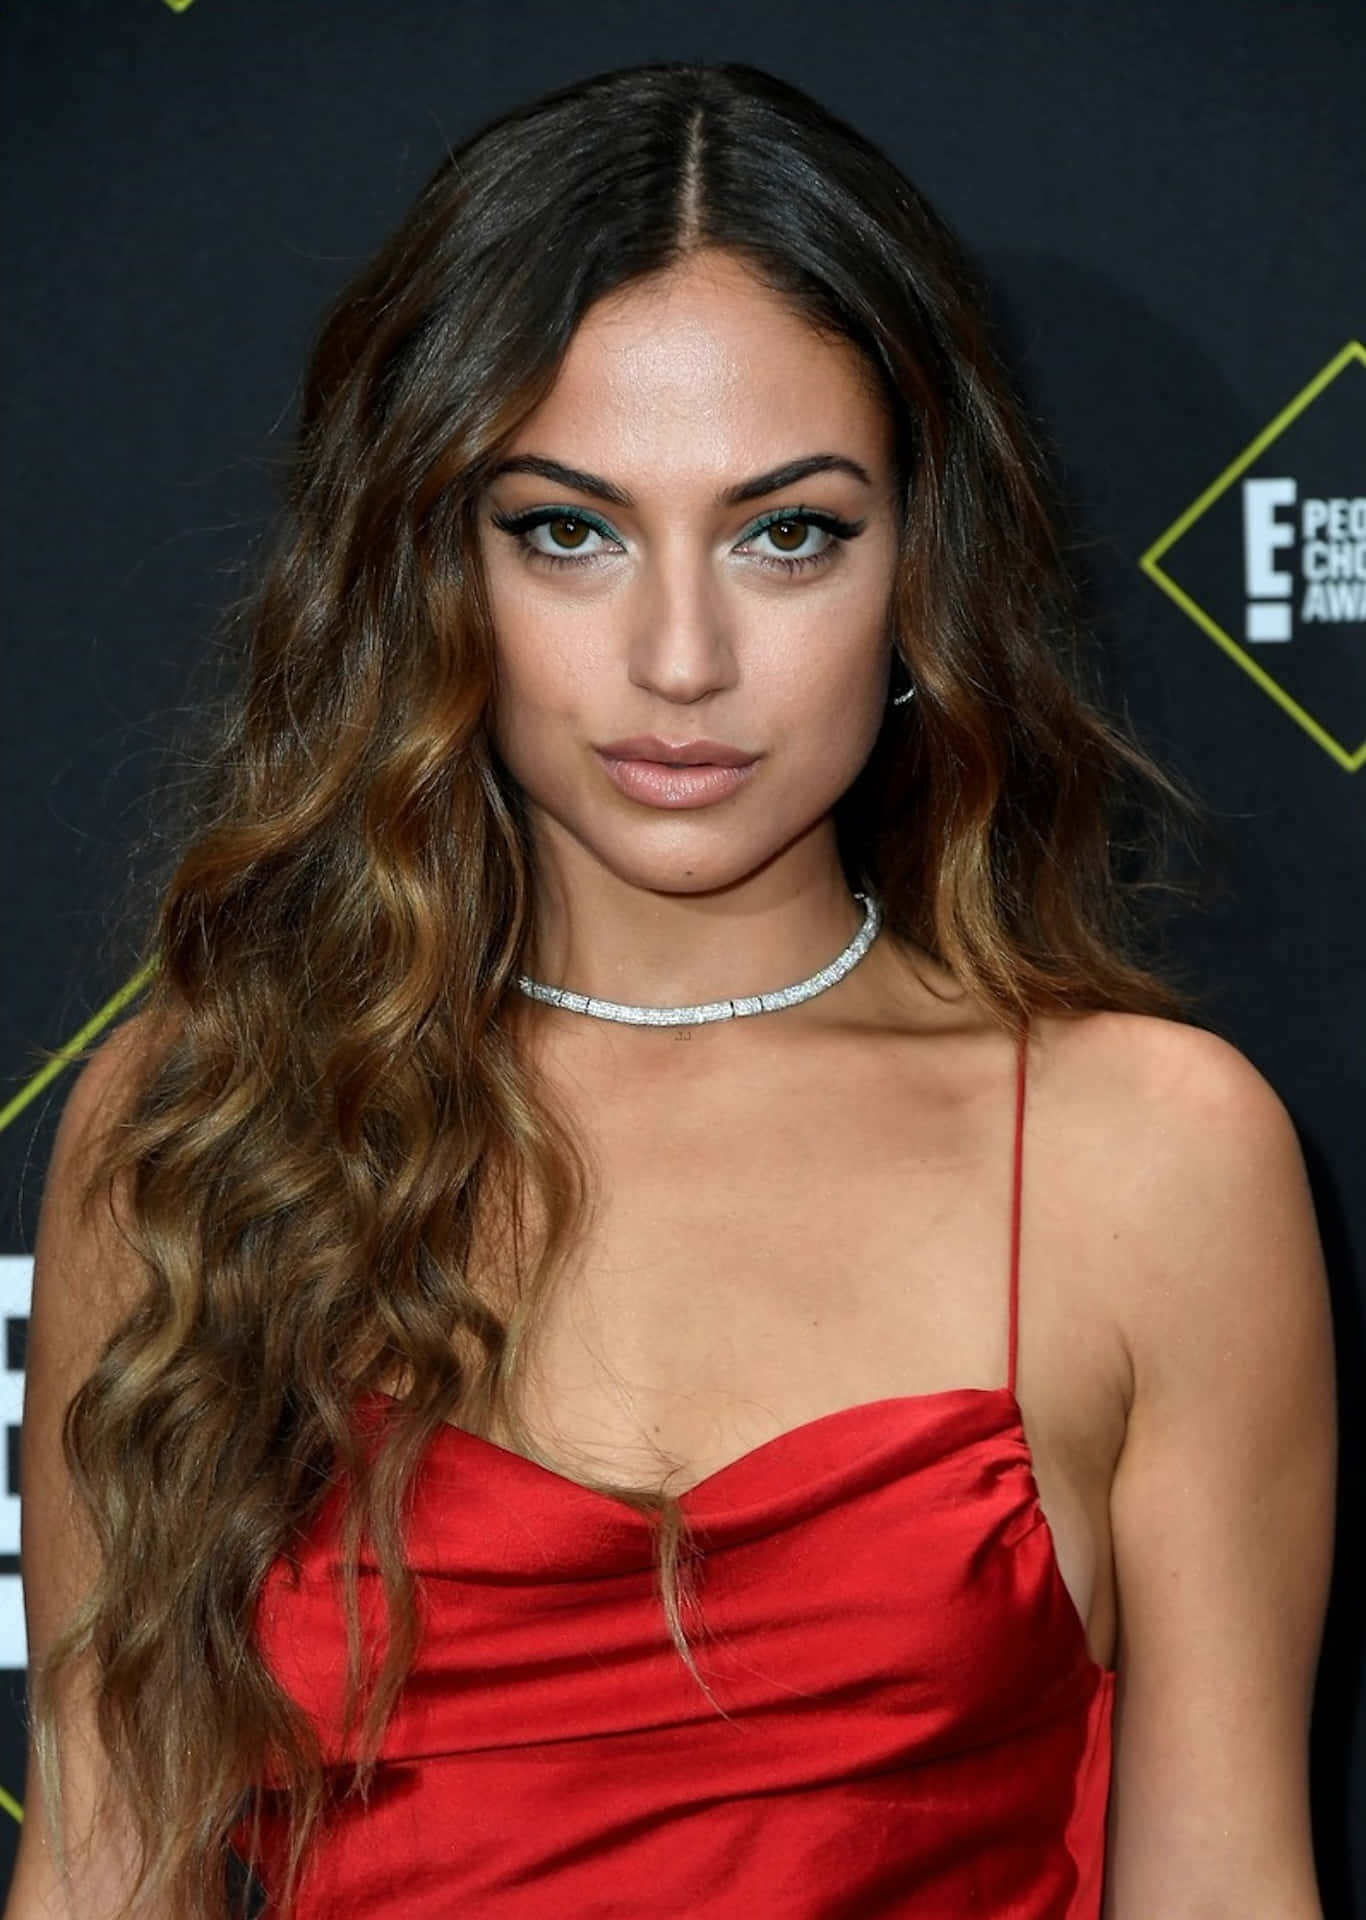 Inanna Sarkis Red Dress Event Wallpaper